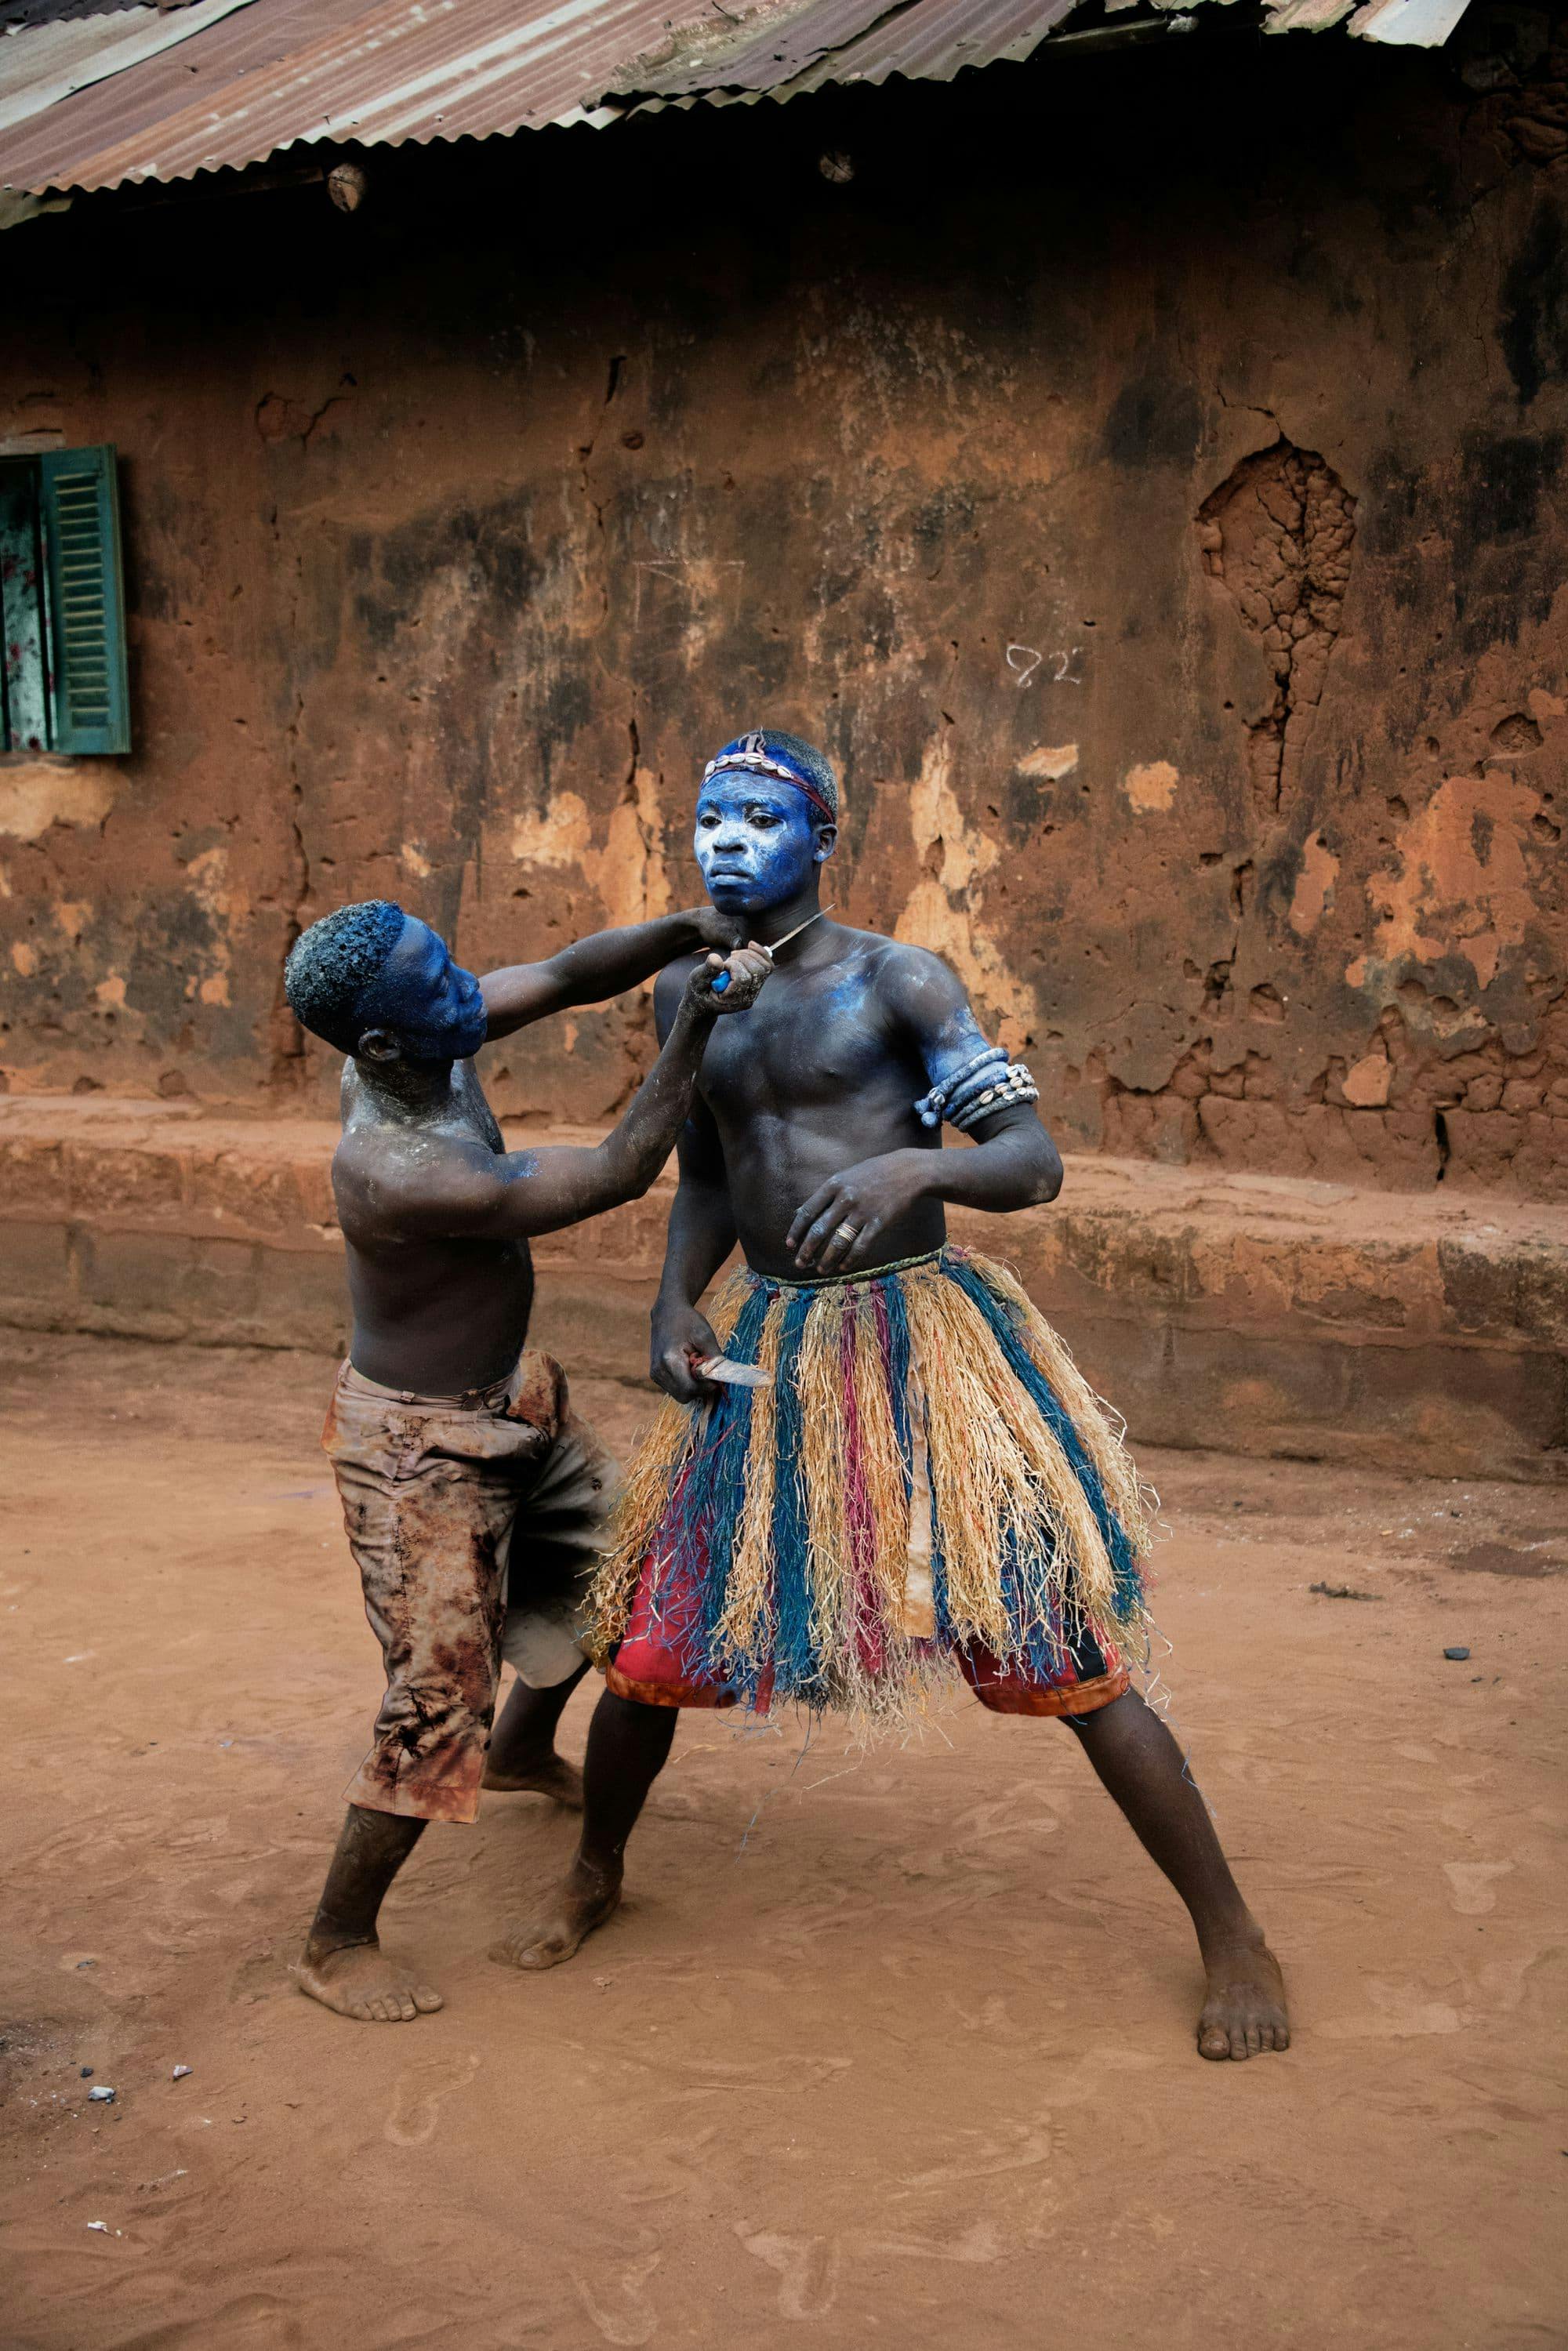 West Africa by Steve McCurry